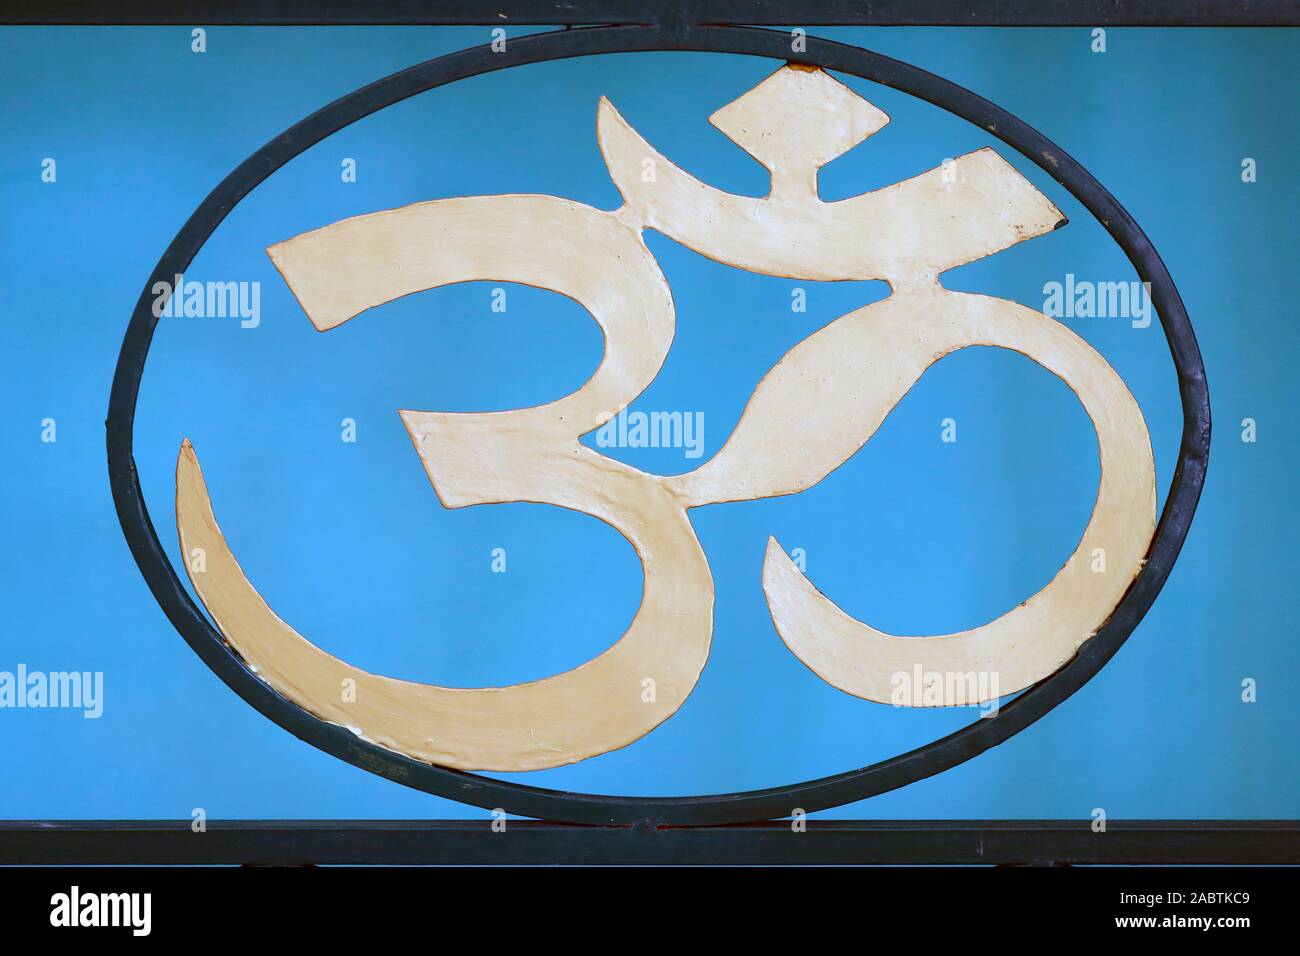 Hindu temple. The Om or Aum symbol. In Hinduism, Om is one of the most important spiritual sounds. Stock Photo